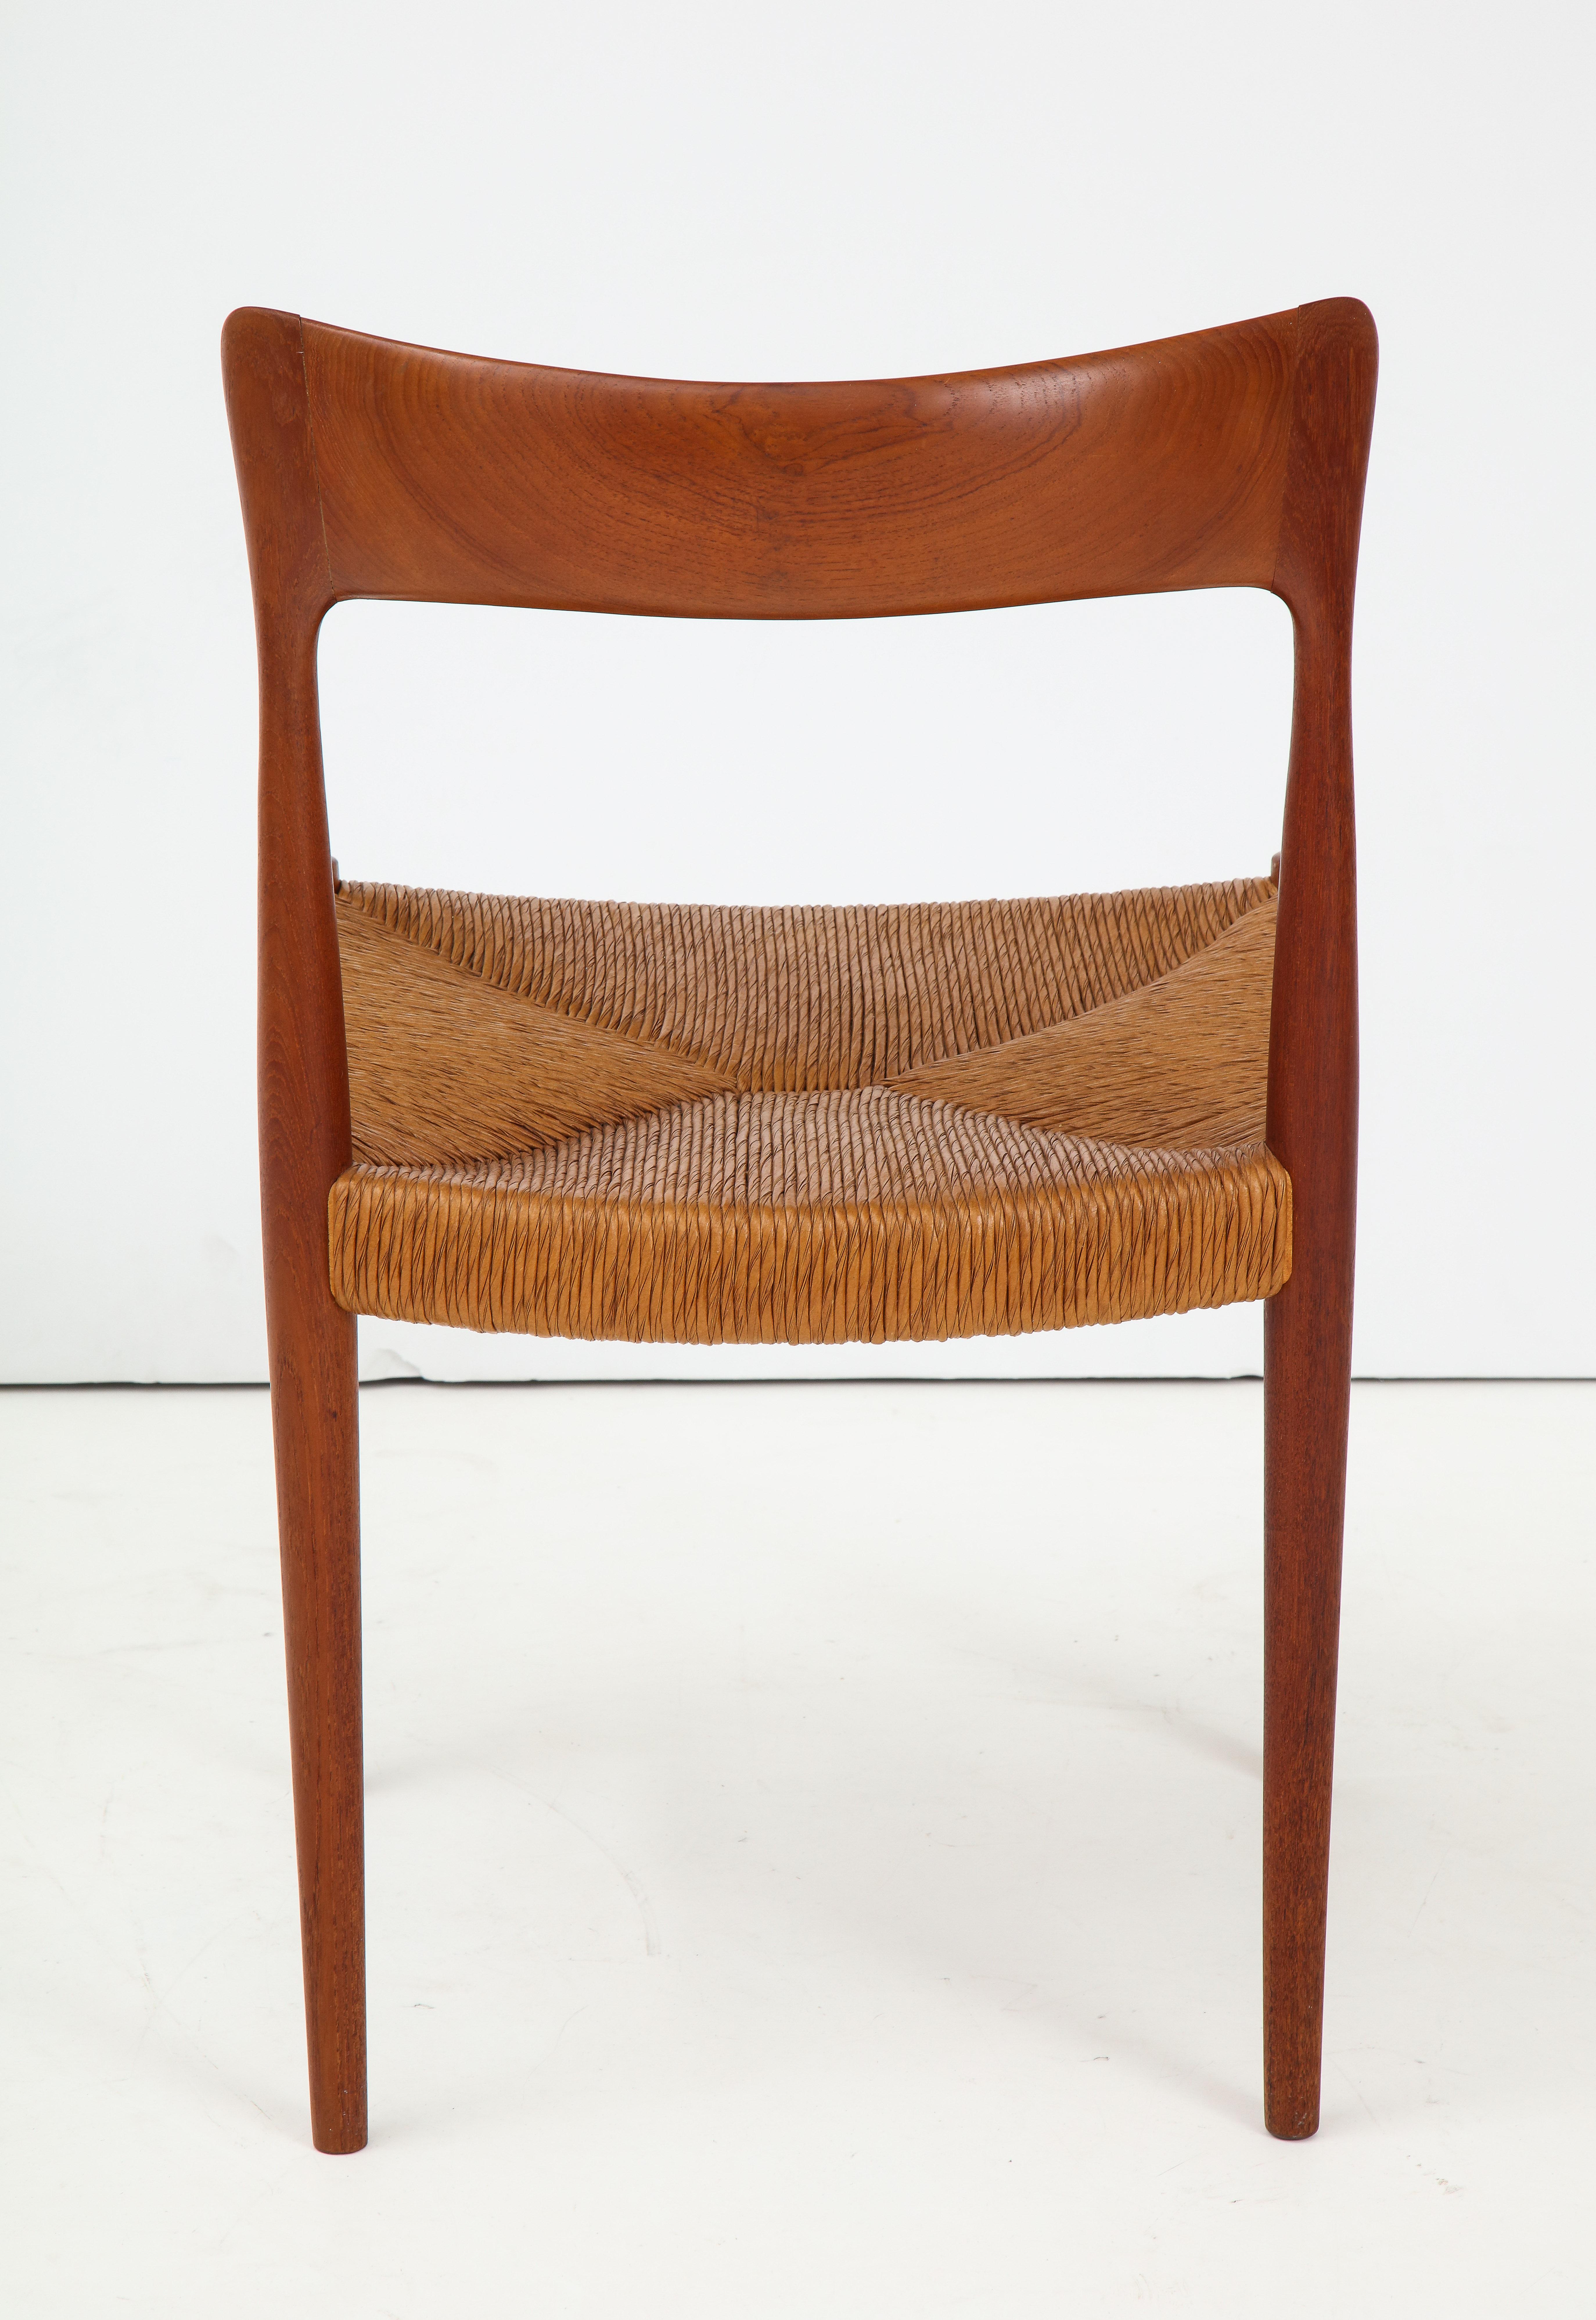 1950s Danish Teak Modernist Dining Chairs with Paper Cord Seats 3